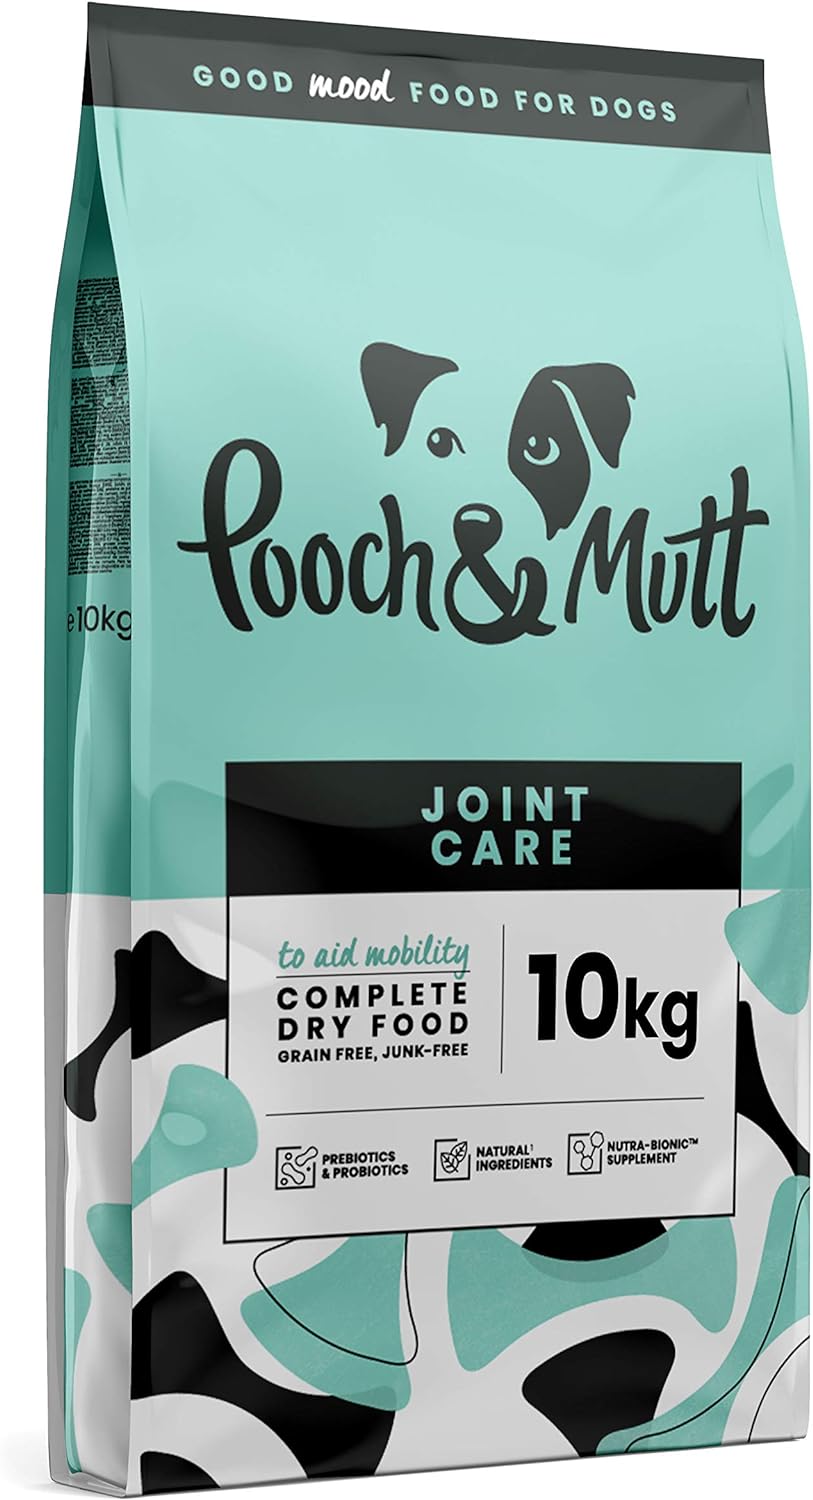 Joint Care Dog Food